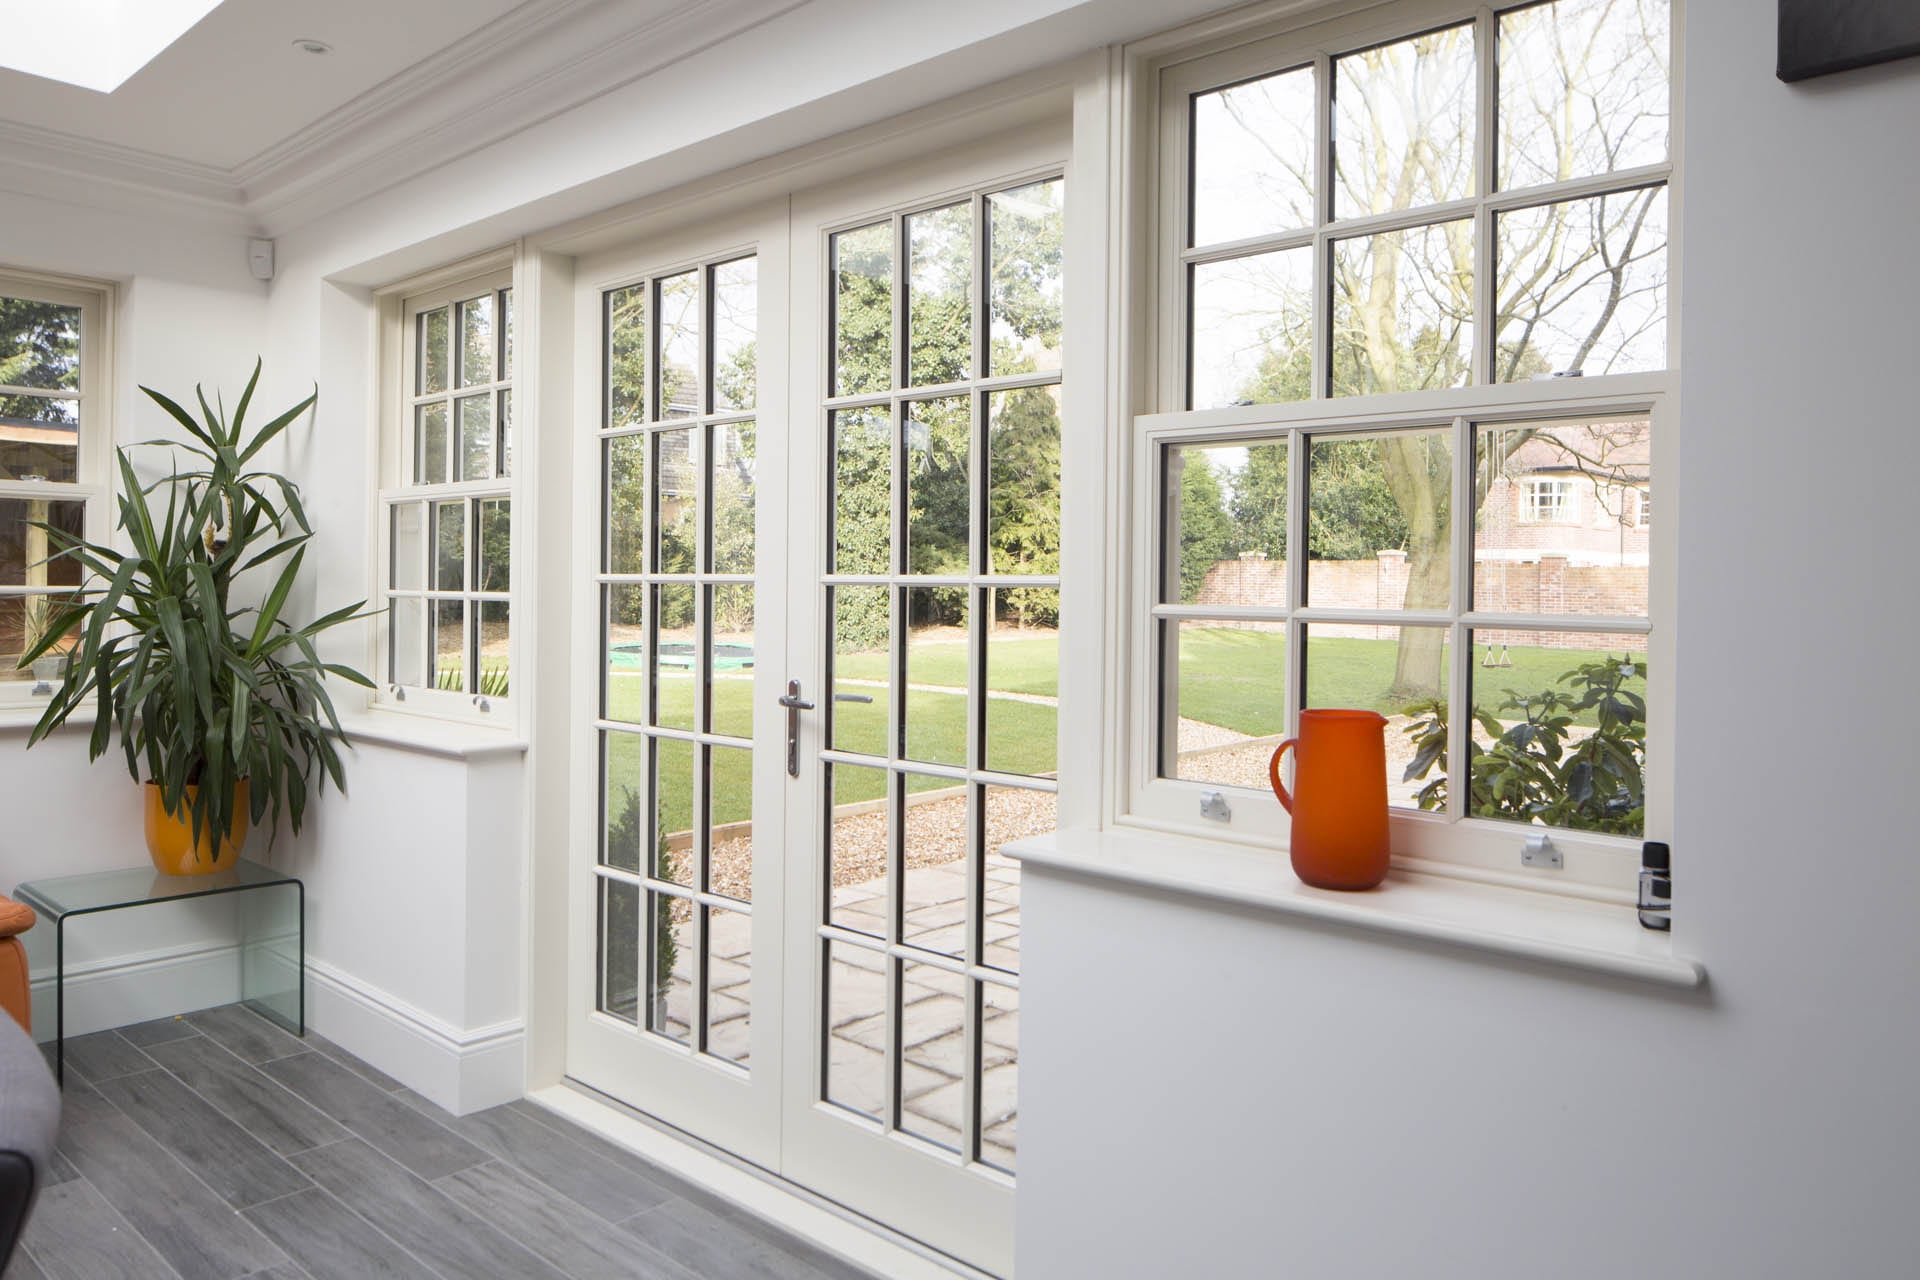 Classic range of wooden windows and doors installed in a house